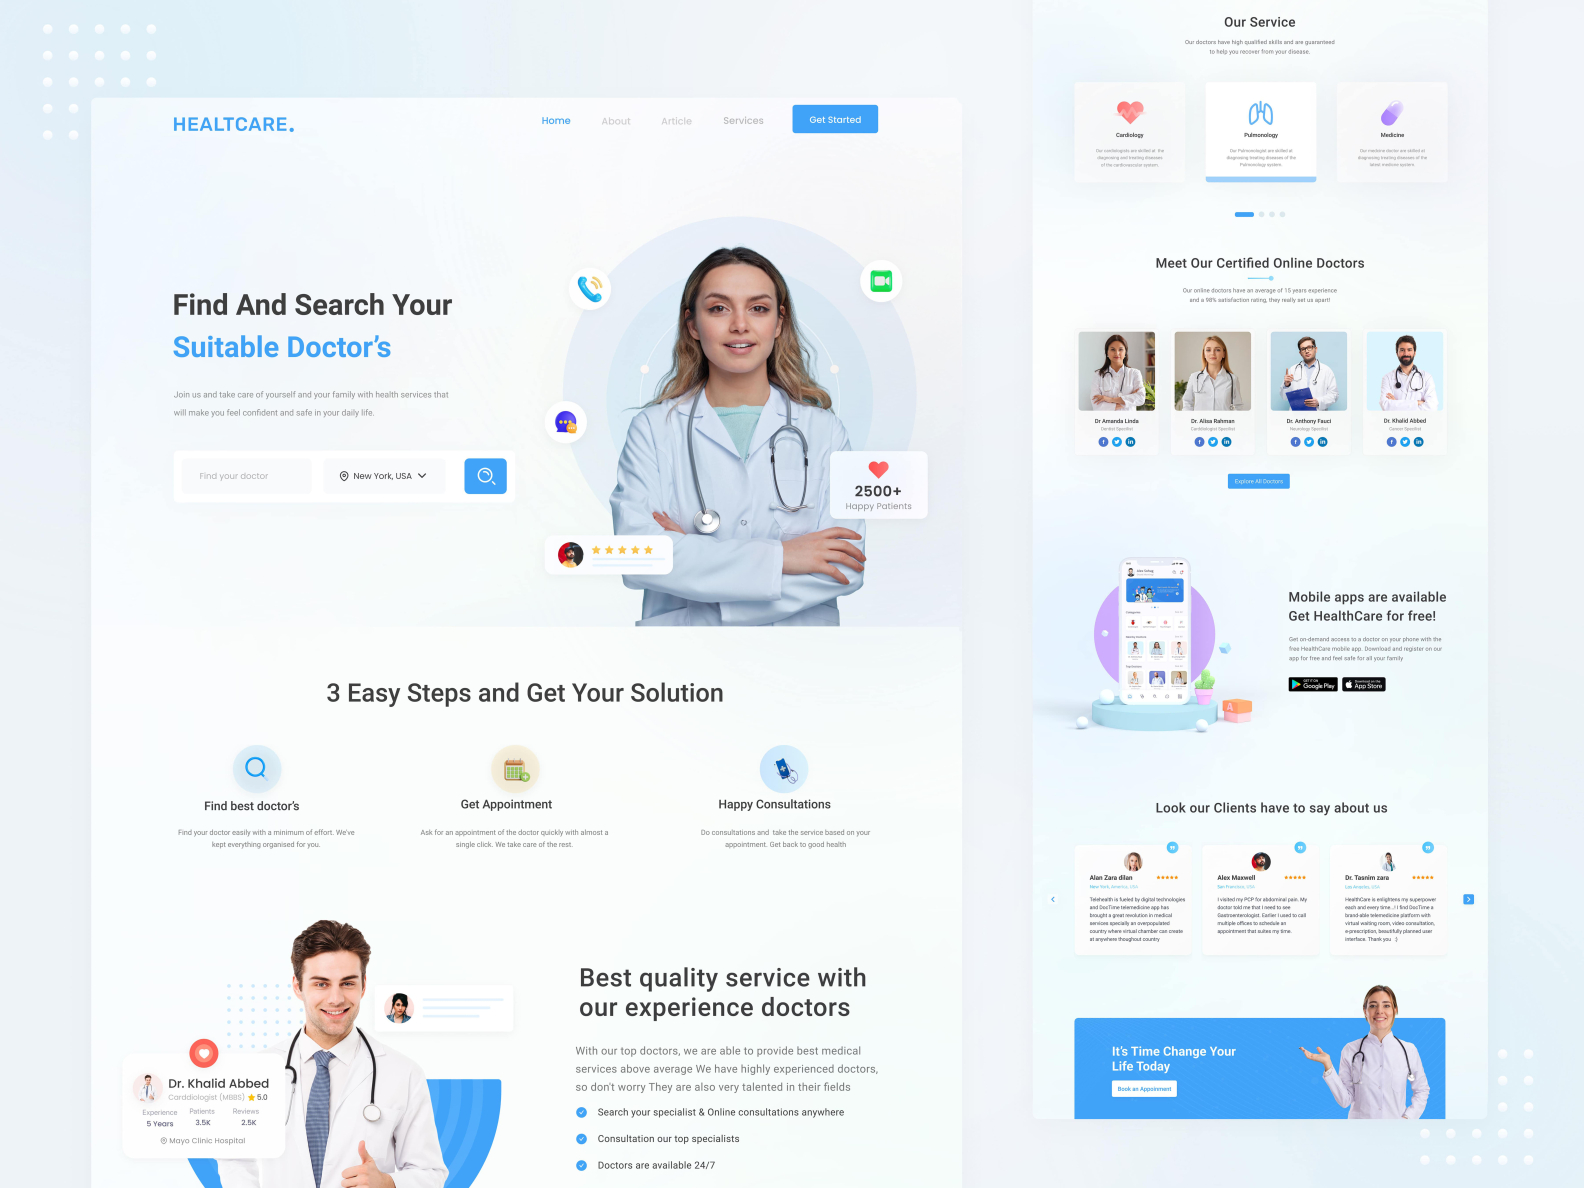 healthcare-doctor-appointment-website-ui-design-by-md-sohag-rana